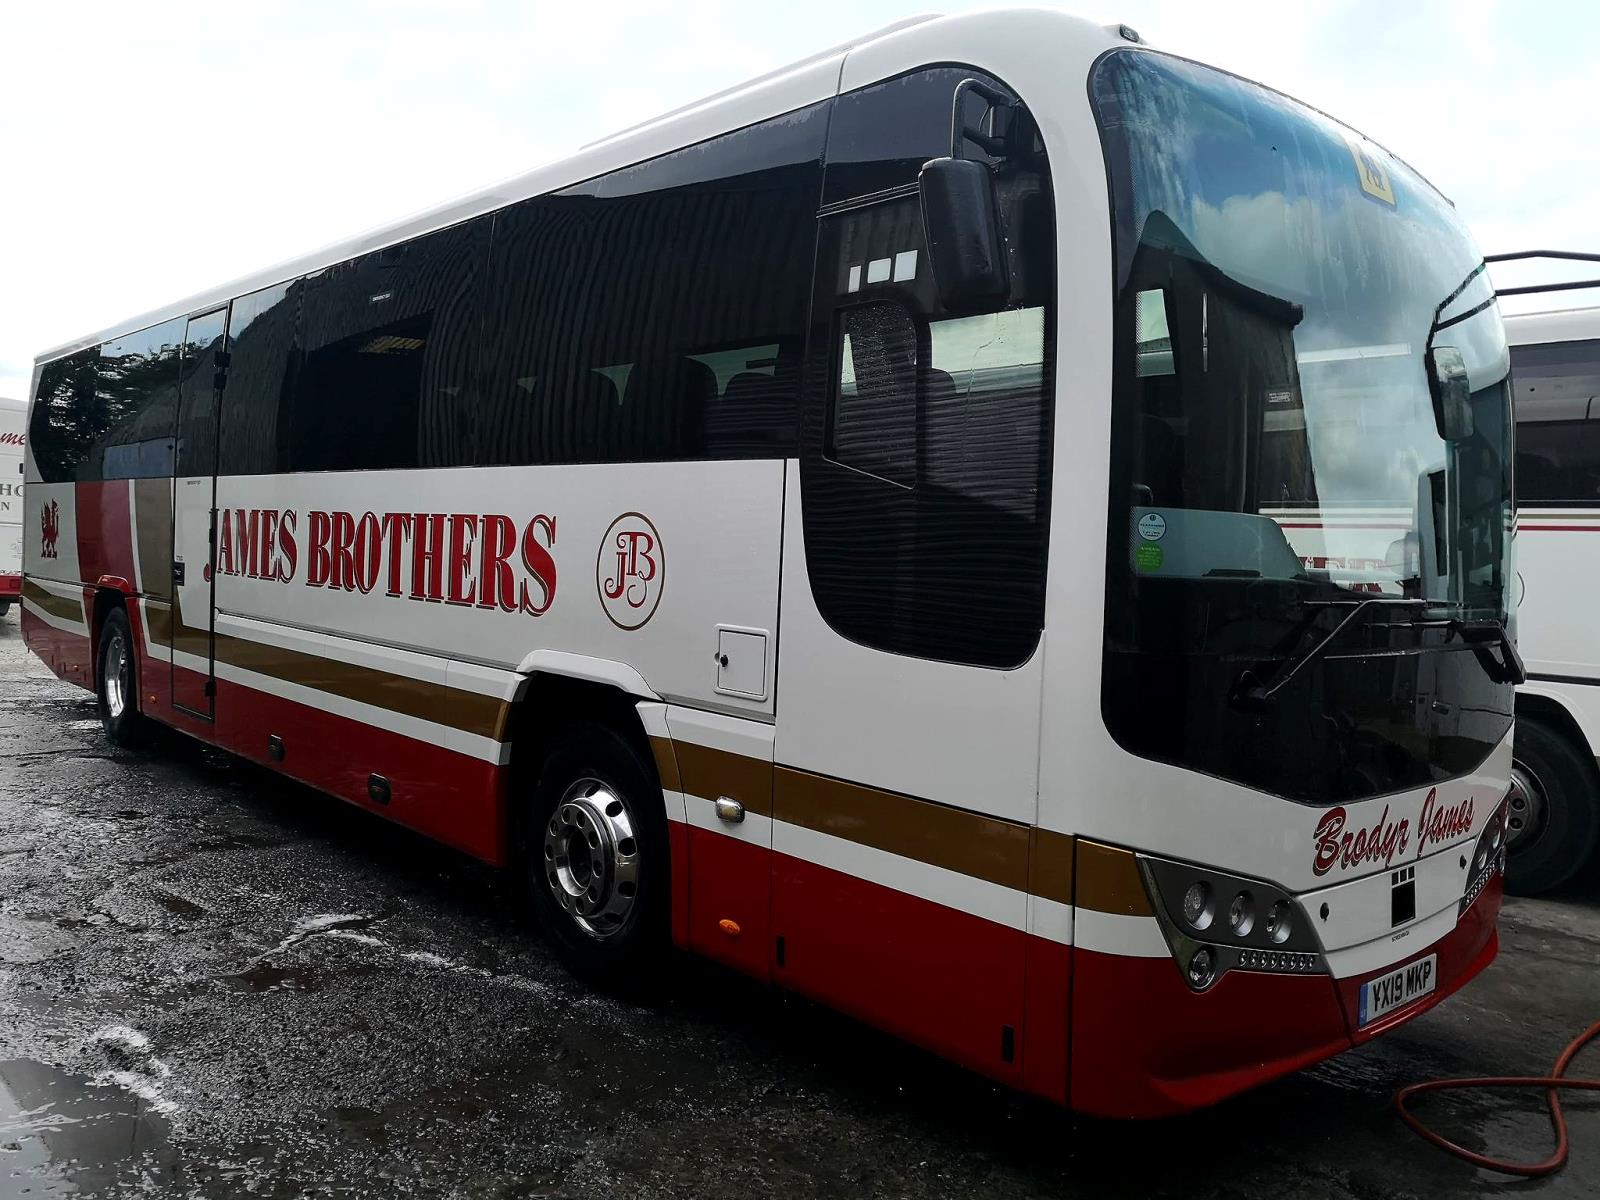 MKP 57 Seater CoachBrodyr James Coaches For Hire